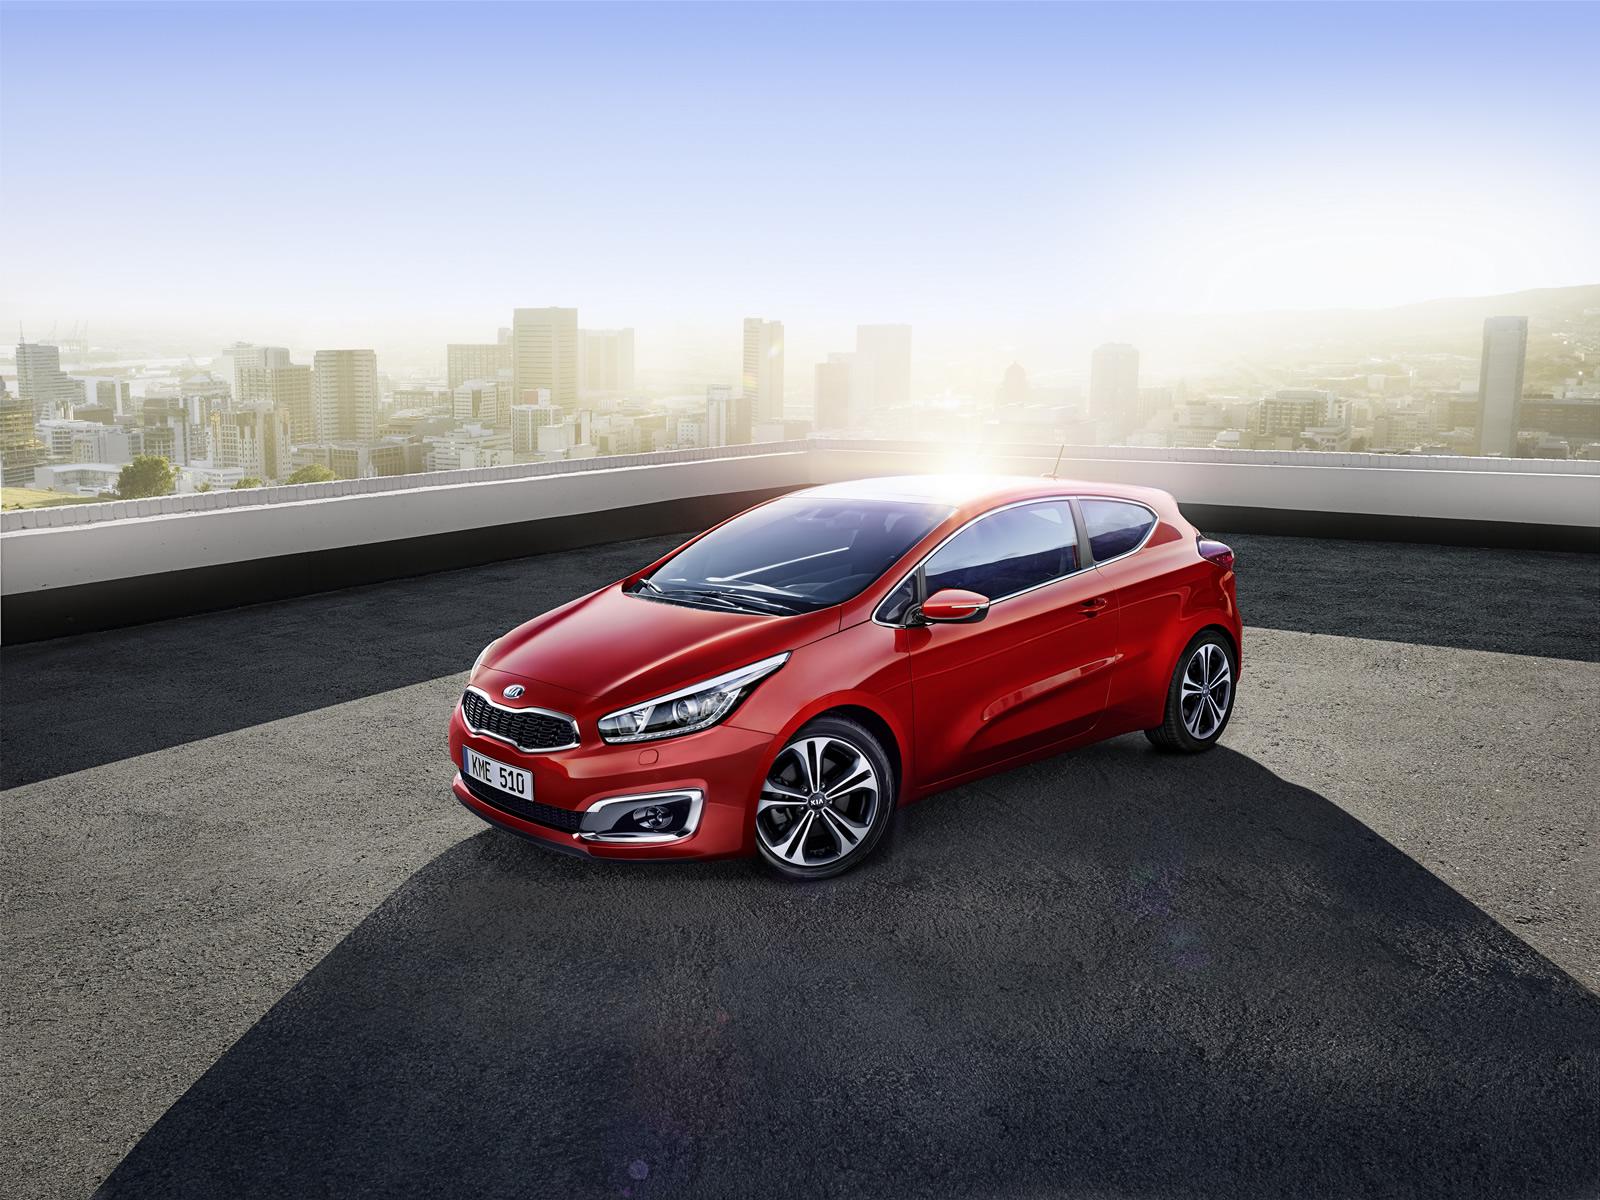 2015 Kia Cee’d Facelift Gets 1.0 ecoTurbo Engine and 7